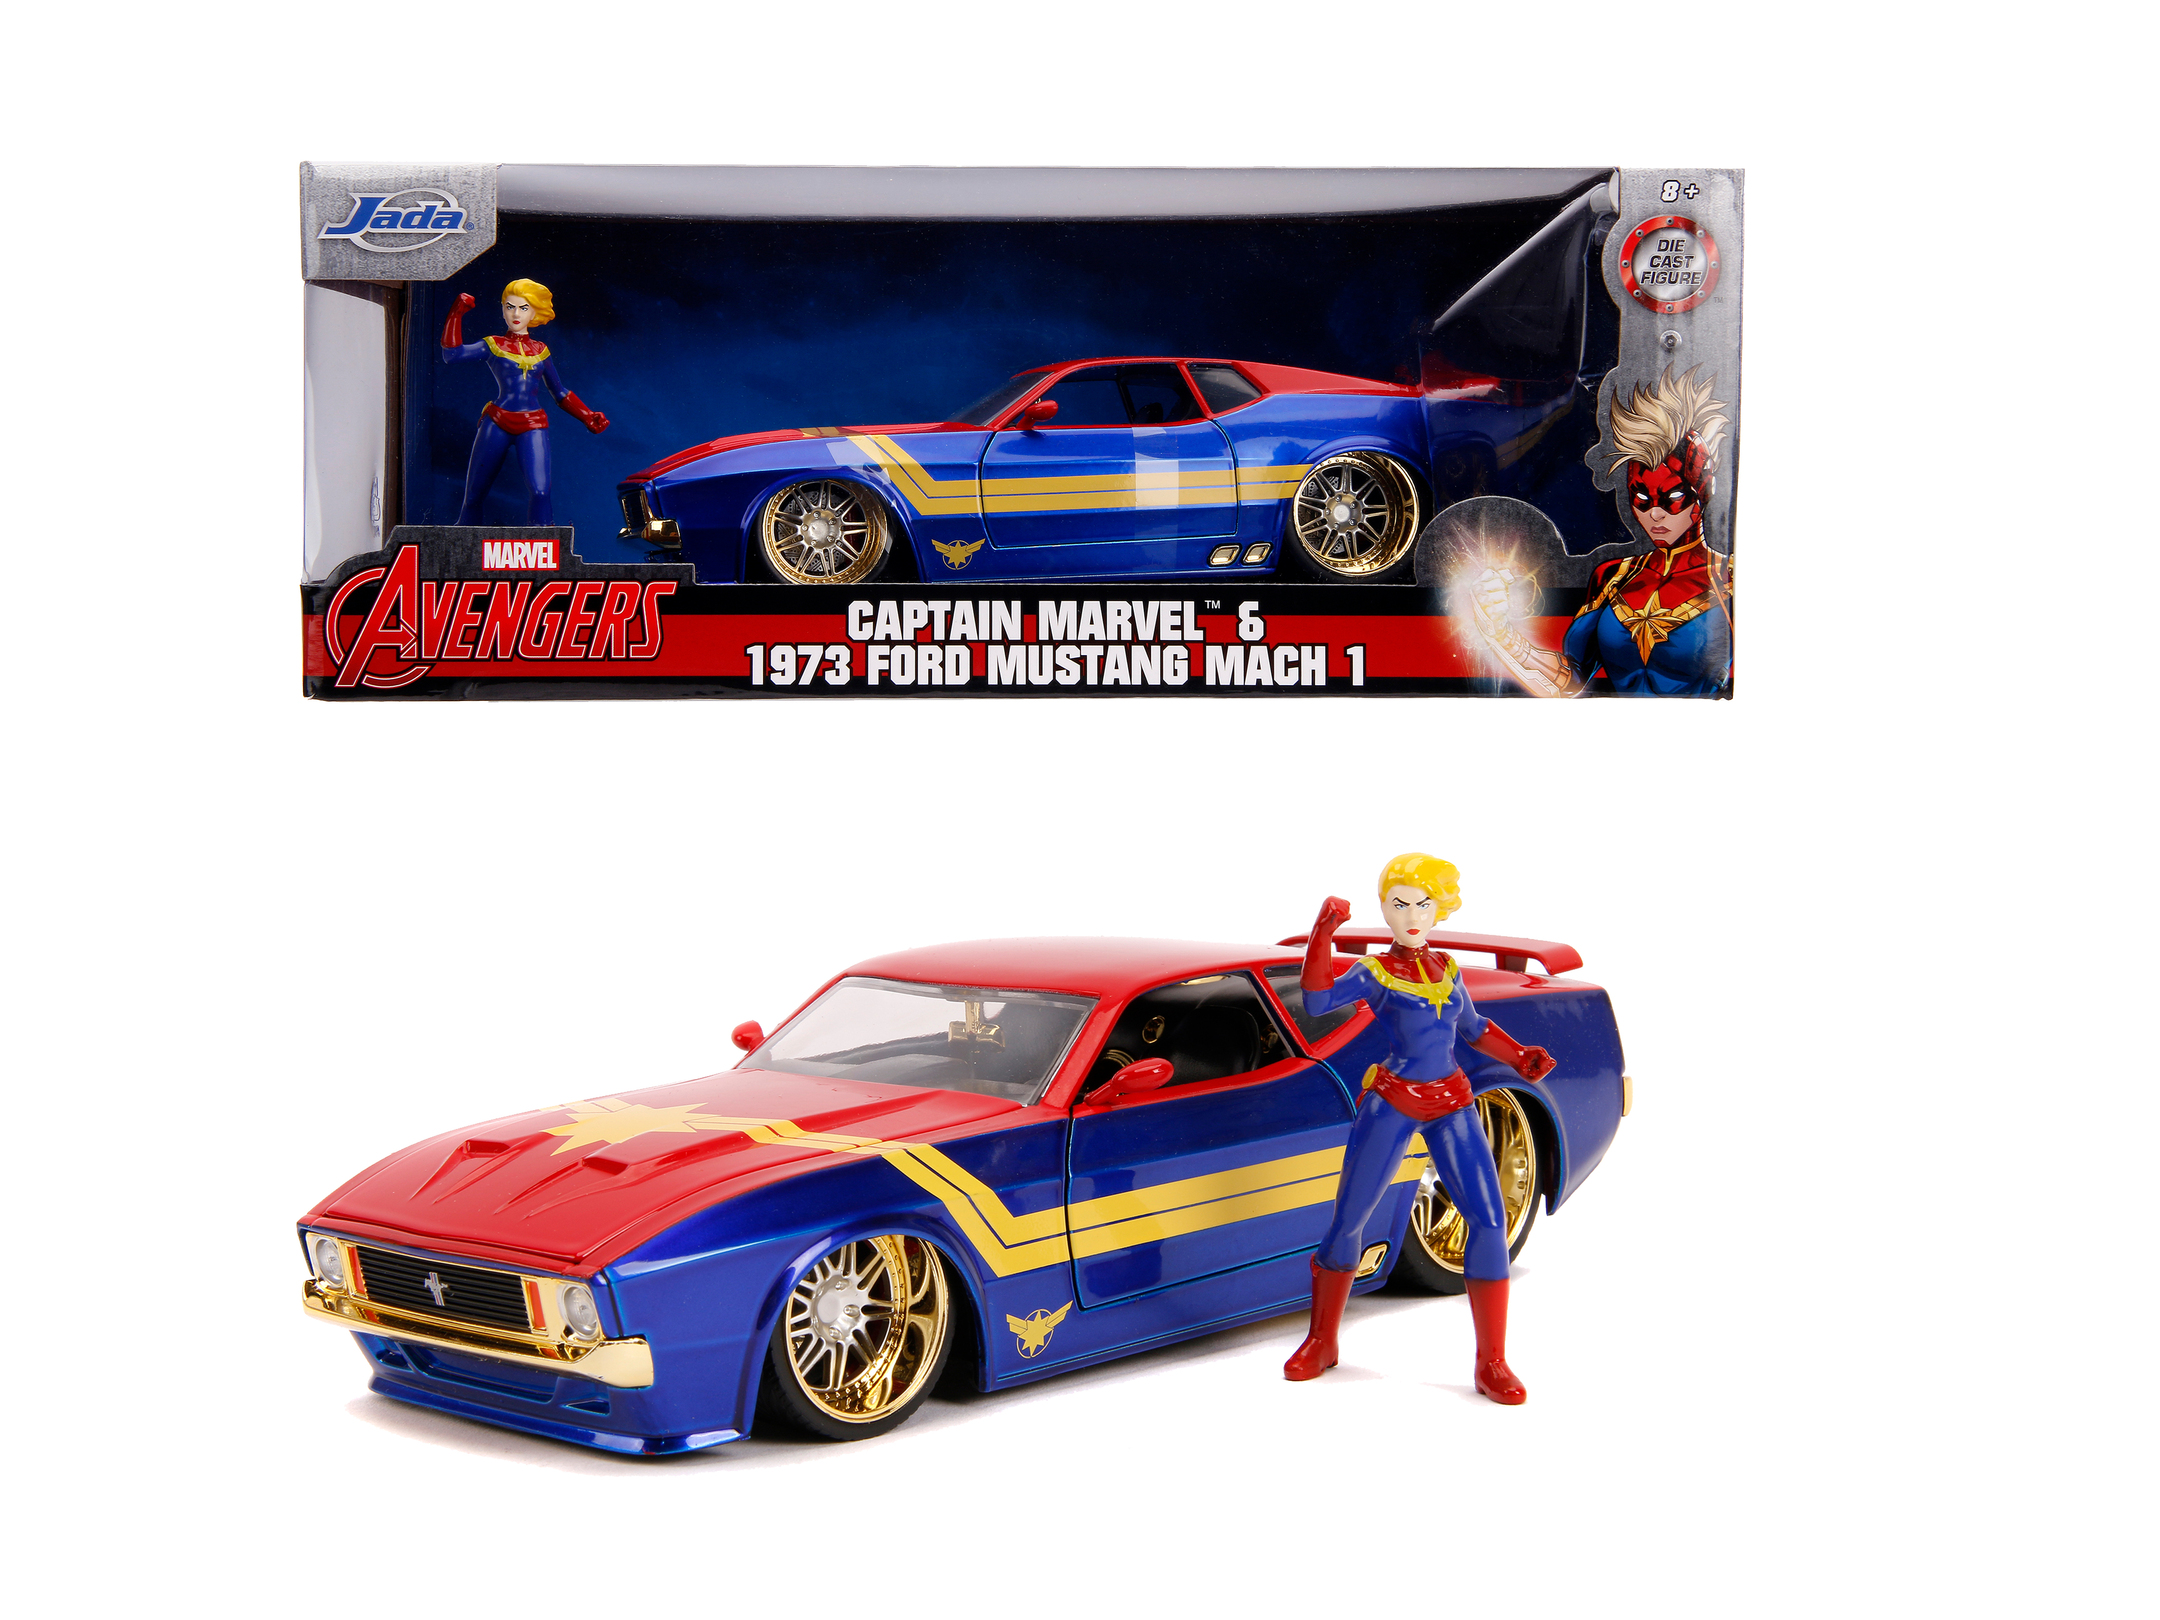 Marvel Avengers Ford Mustang Mach 1 1:24